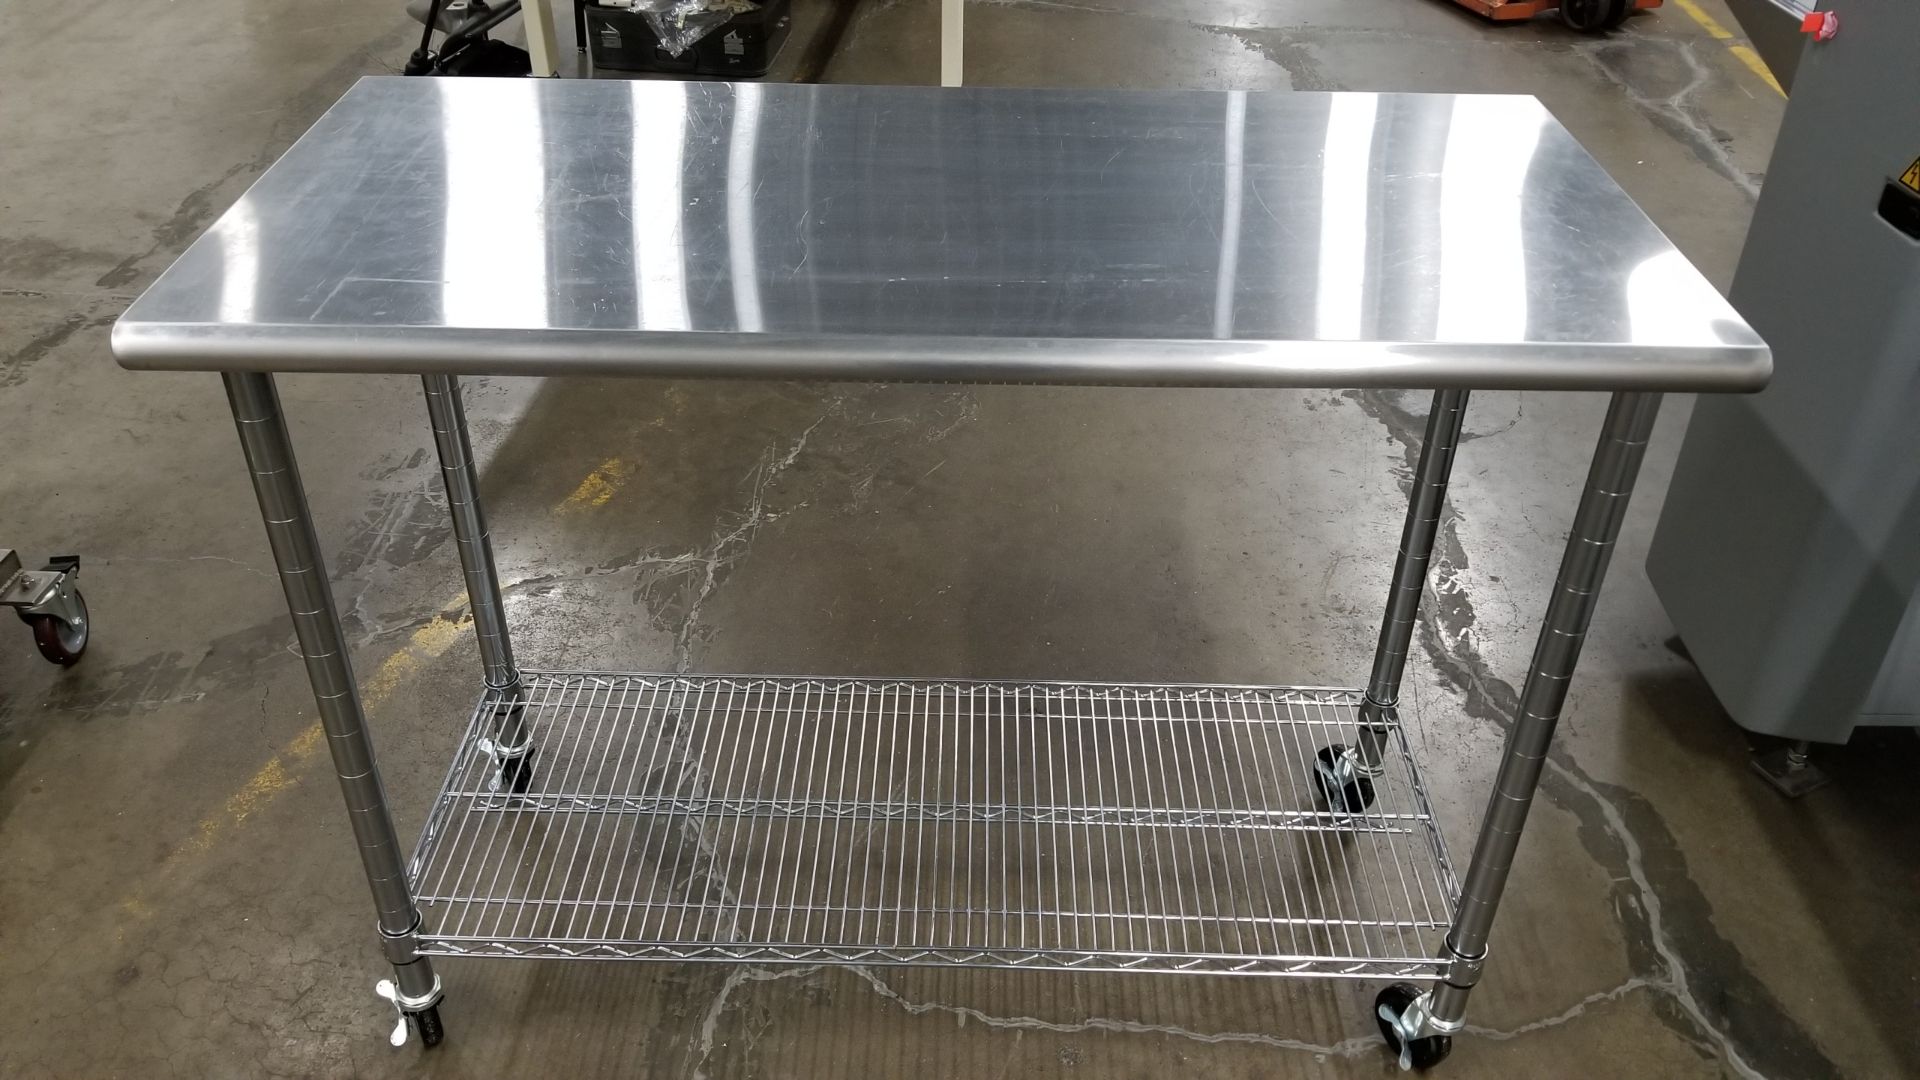 24" x 50" stainless steel table